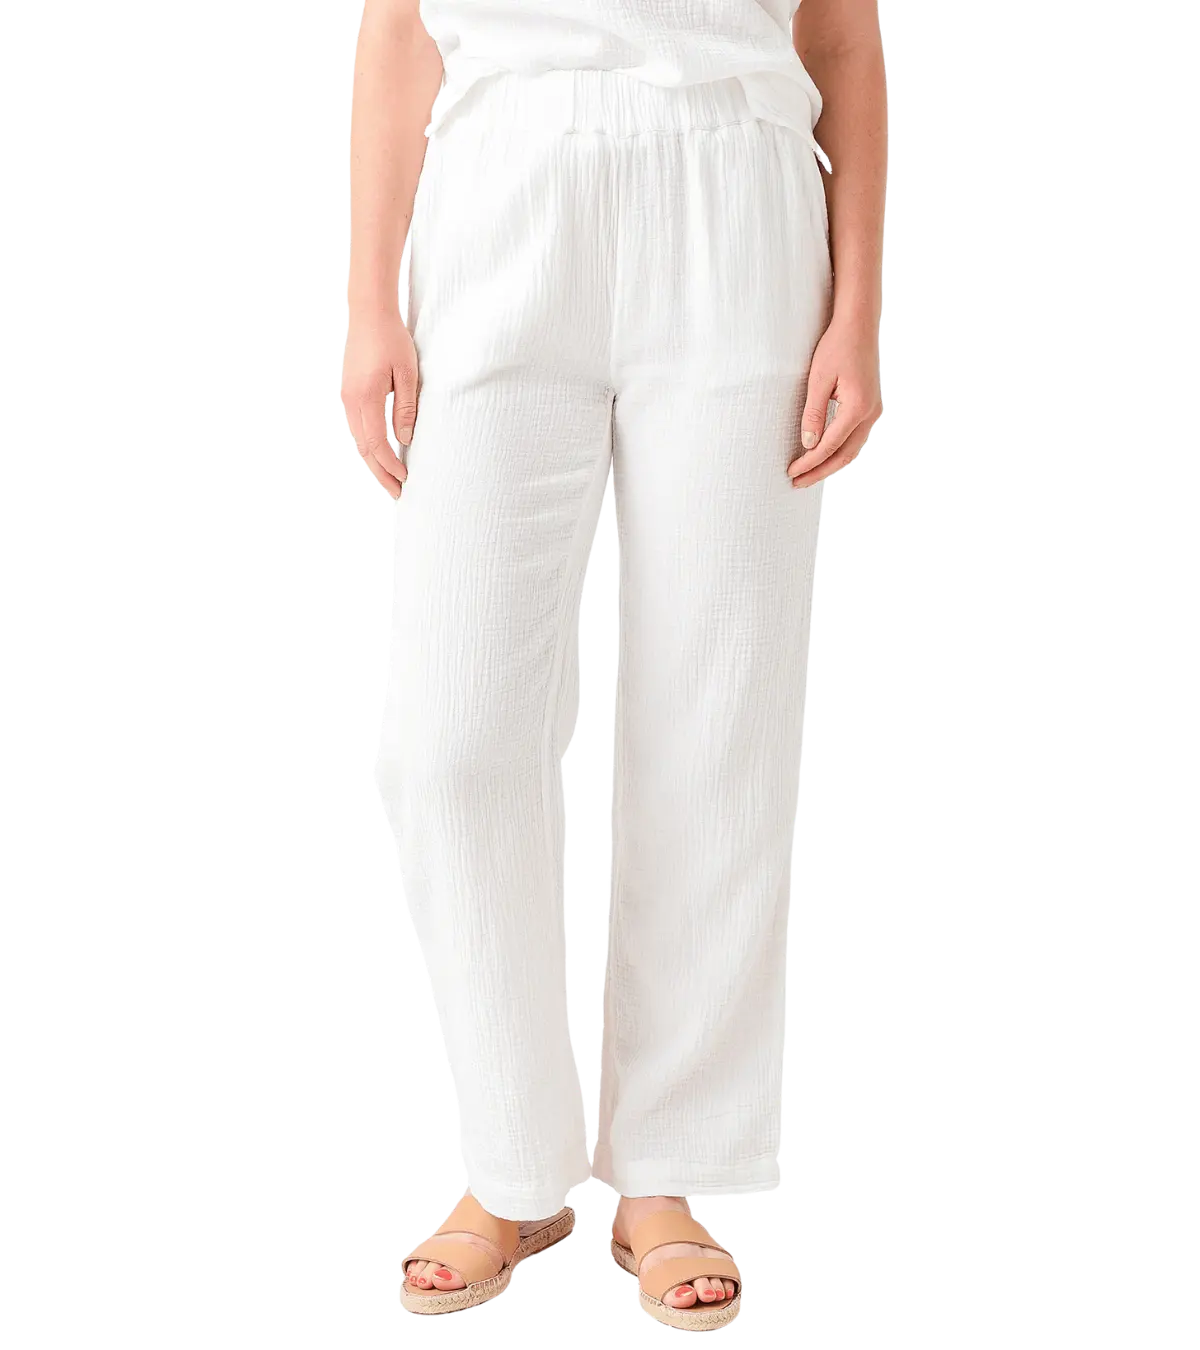 High Waist Pink Ladies Plain Cotton Pant, Casual Wear, Slim Fit at Rs  270/piece in Surat